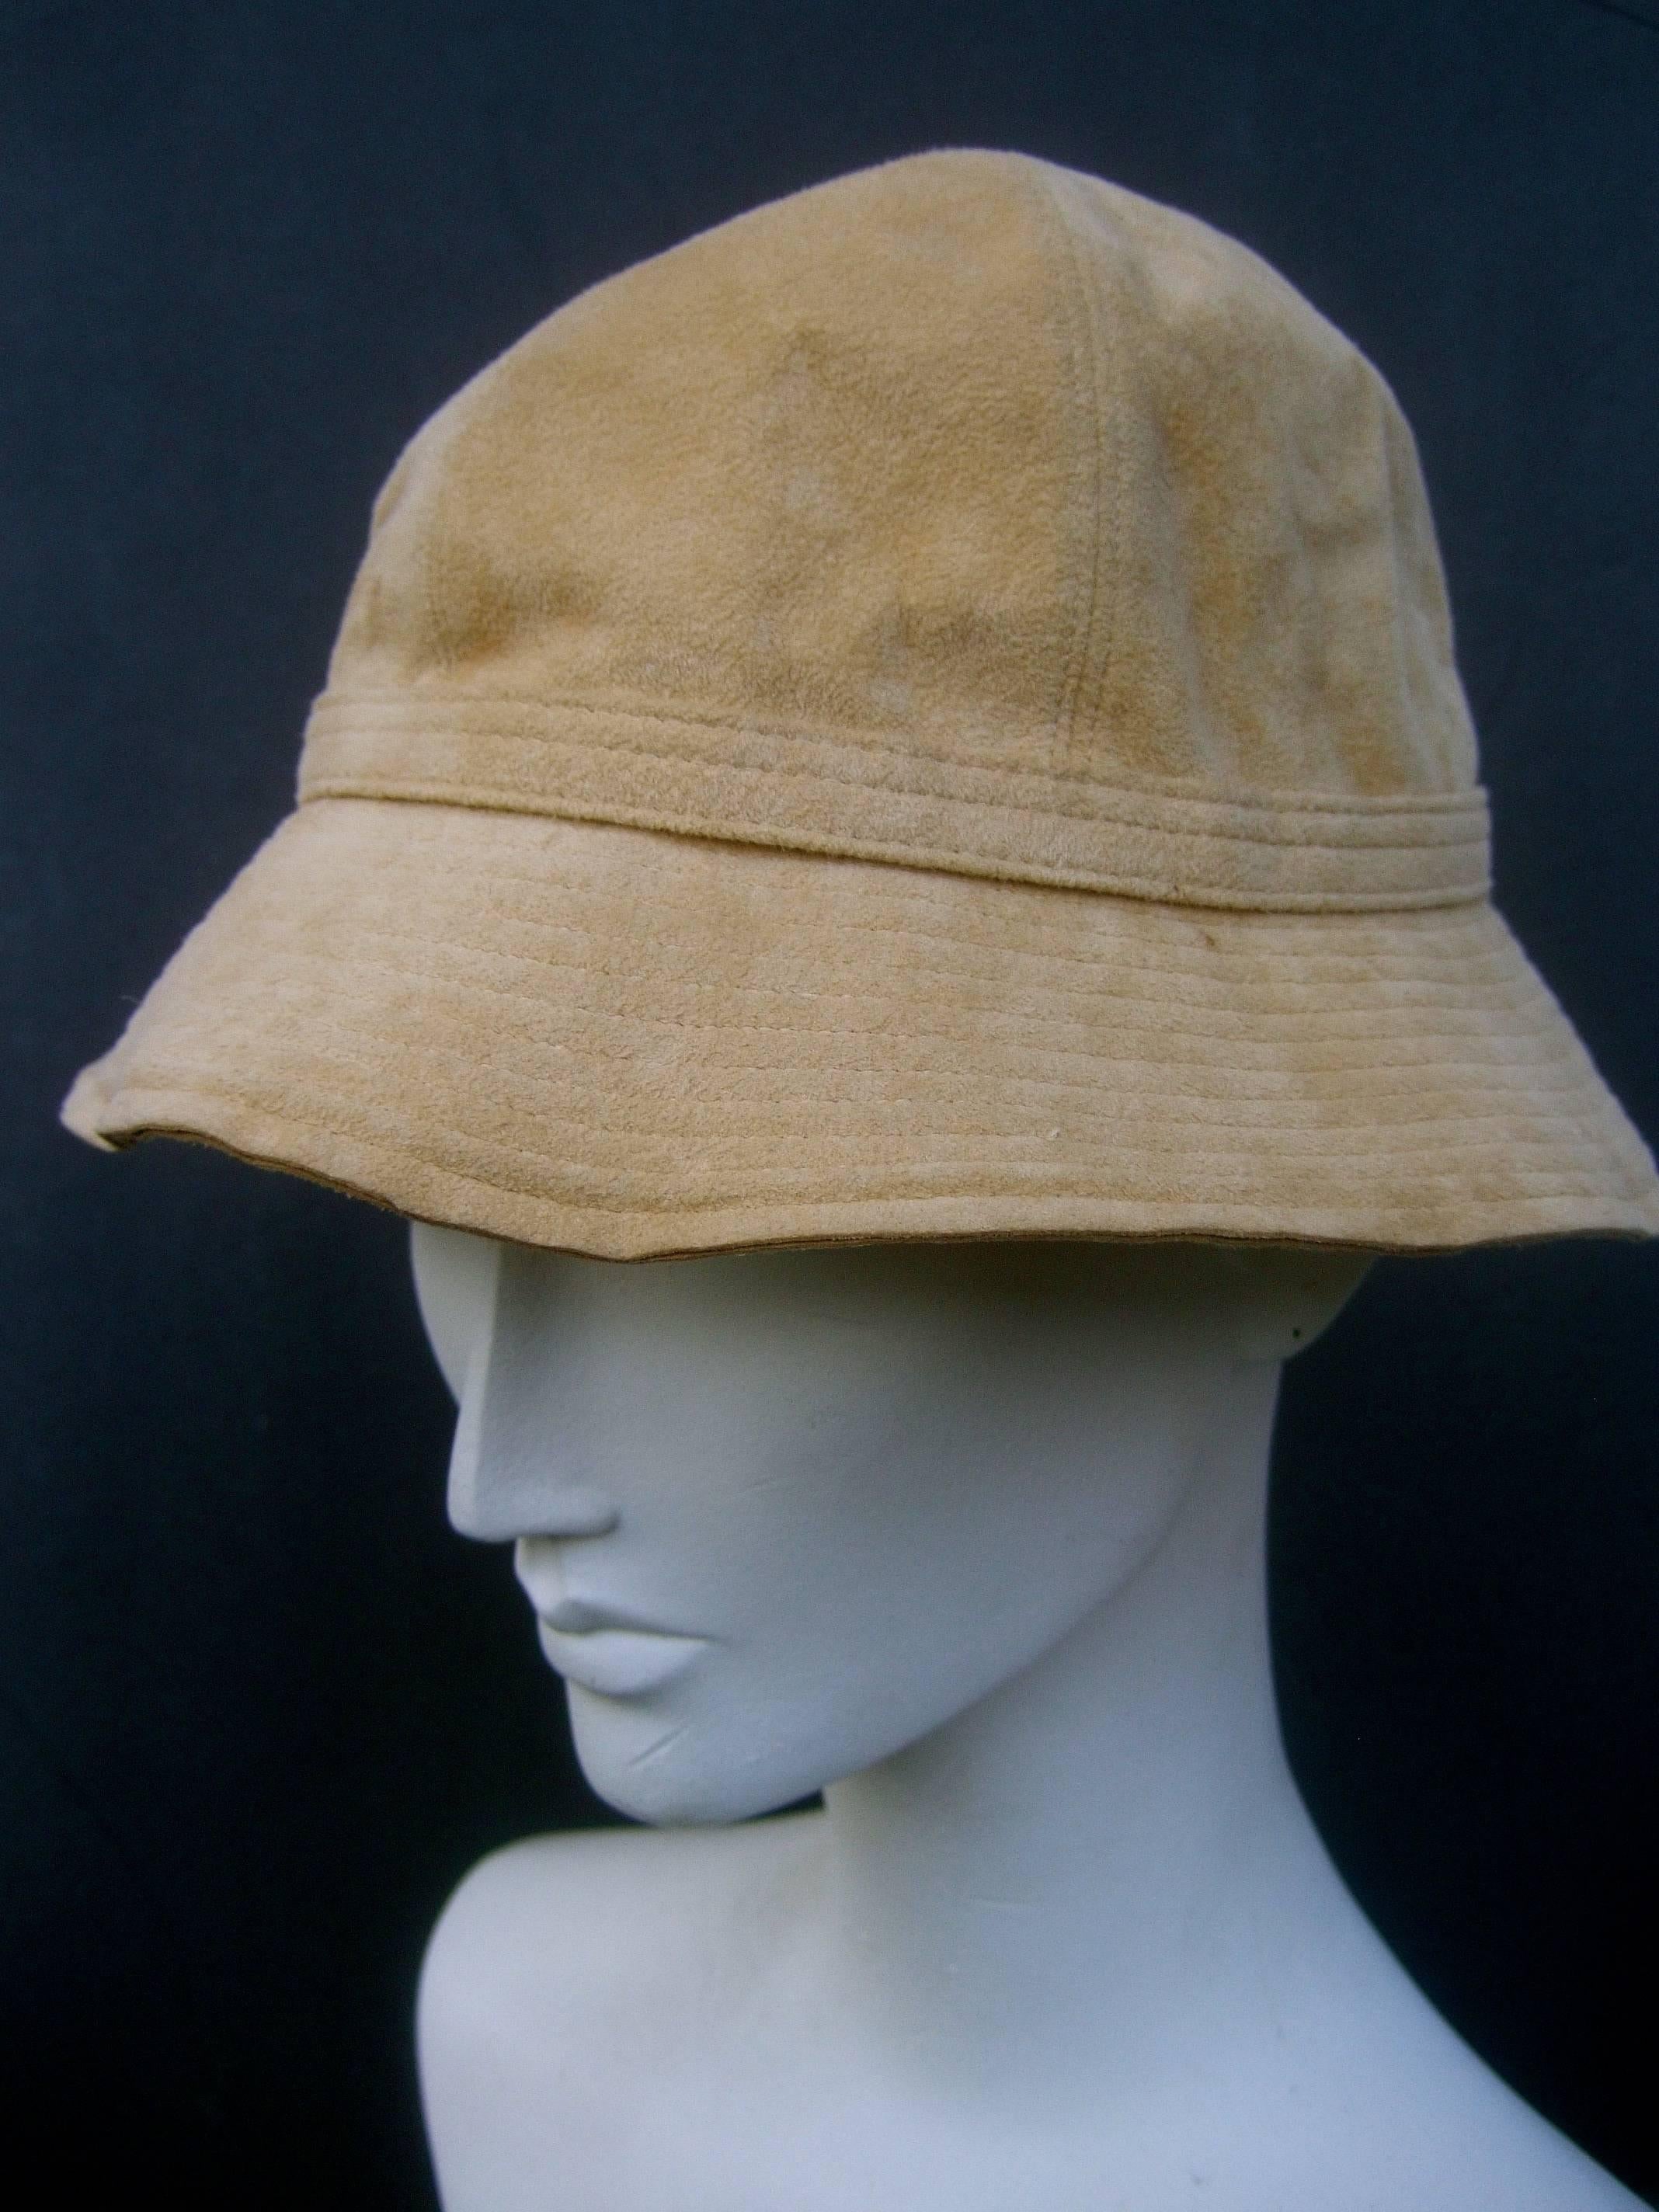 Halston beige ultra faux suede hat c 1970s
The soft cloth feather suede retro hat 
makes a chic timeless accessory 

Labeled: Halston No size indicated Refer to measurements 
The interior head size circumference measures 20 inches 